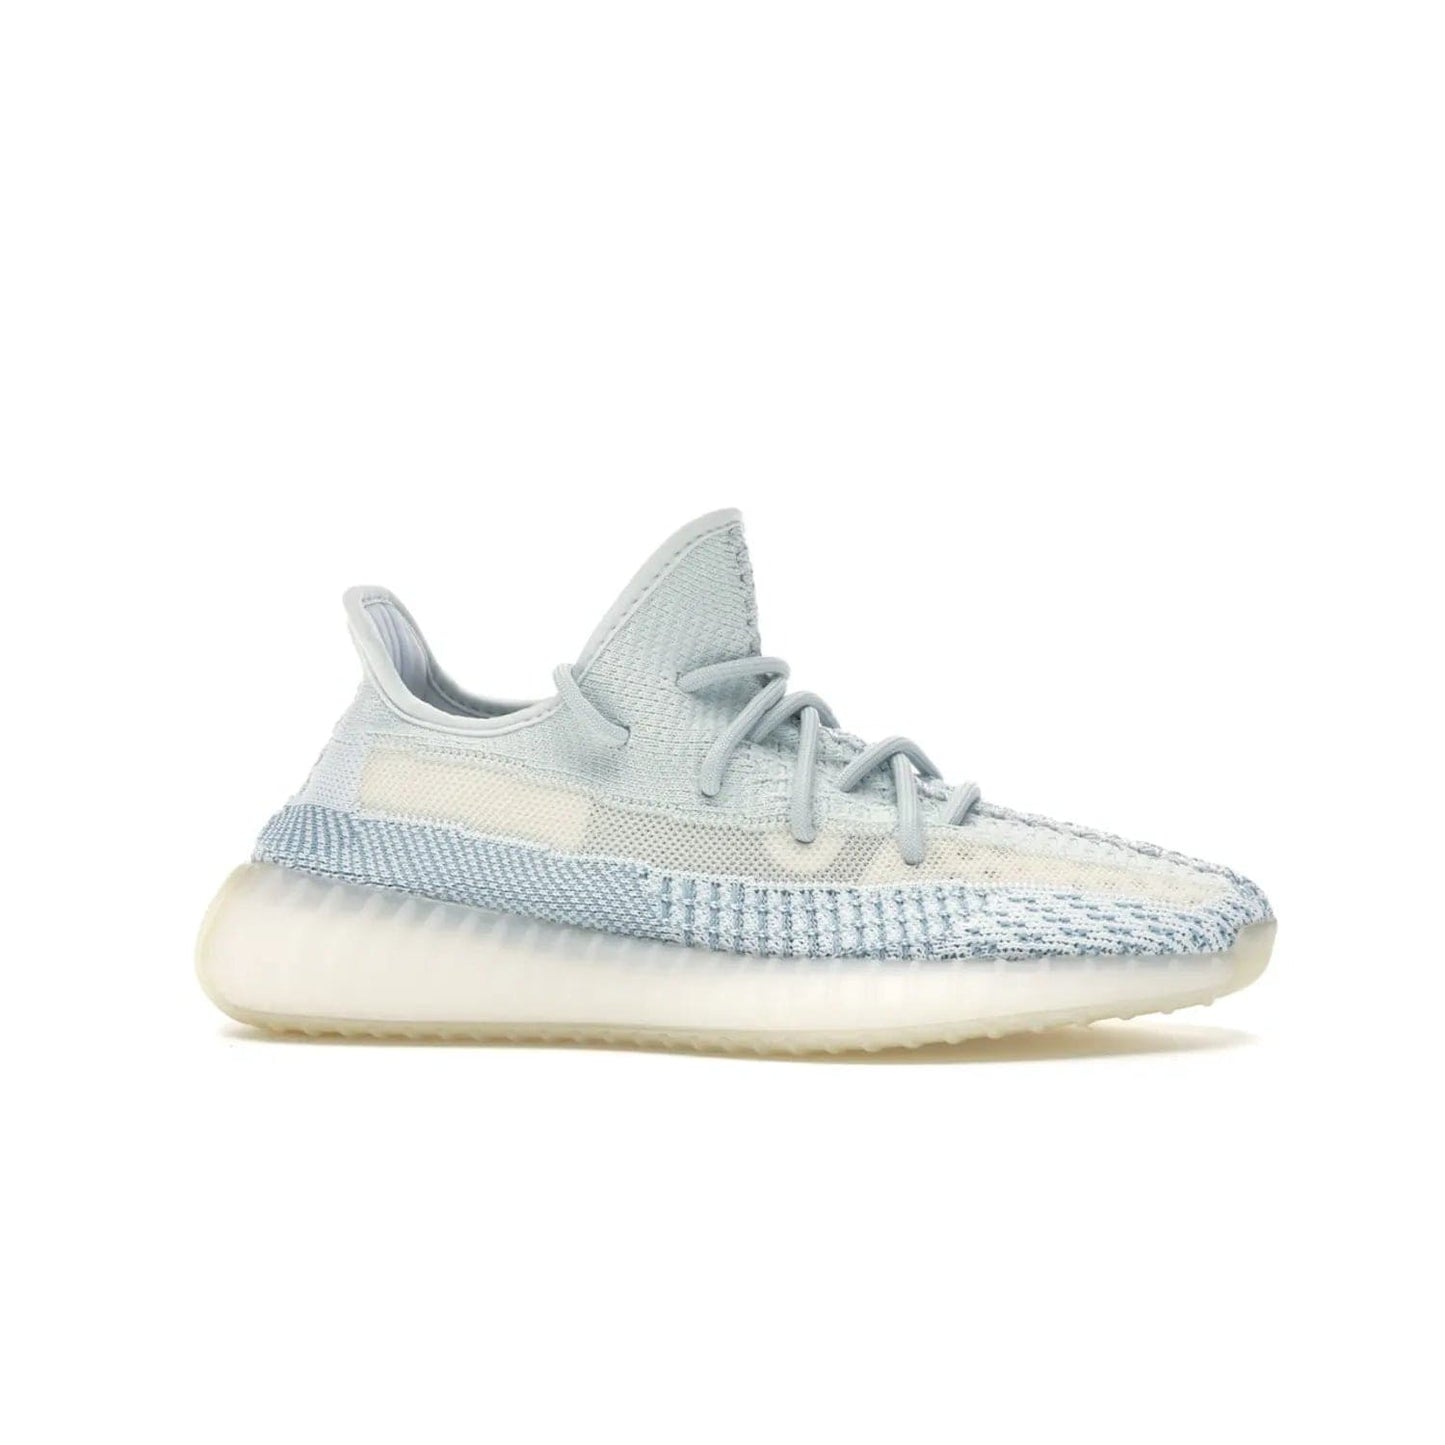 adidas Yeezy Boost 350 V2 Cloud White (Non-Reflective) - Image 2 - Only at www.BallersClubKickz.com - Adidas Yeezy Boost 350 V2 Cloud White (Non-Reflective) features Primeknit fabric and a unique, eye-catching design of cream, bluish-white, and transparent strip. Step out in timeless style with this eye-catching sneaker.